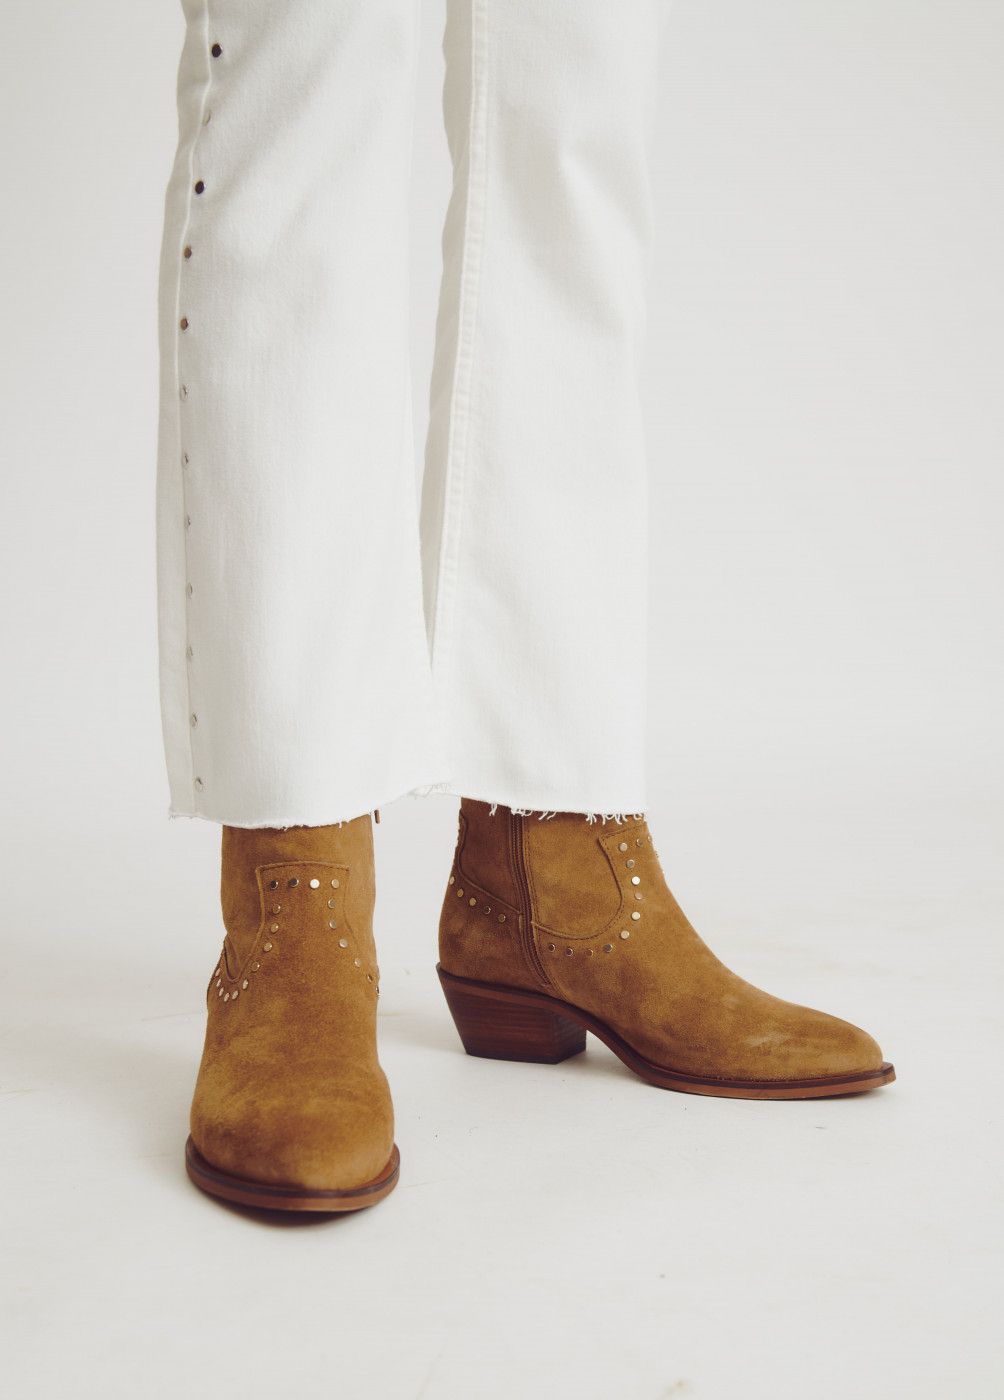 WESTERN-STYLE STUDDED ANKLE BOOTS